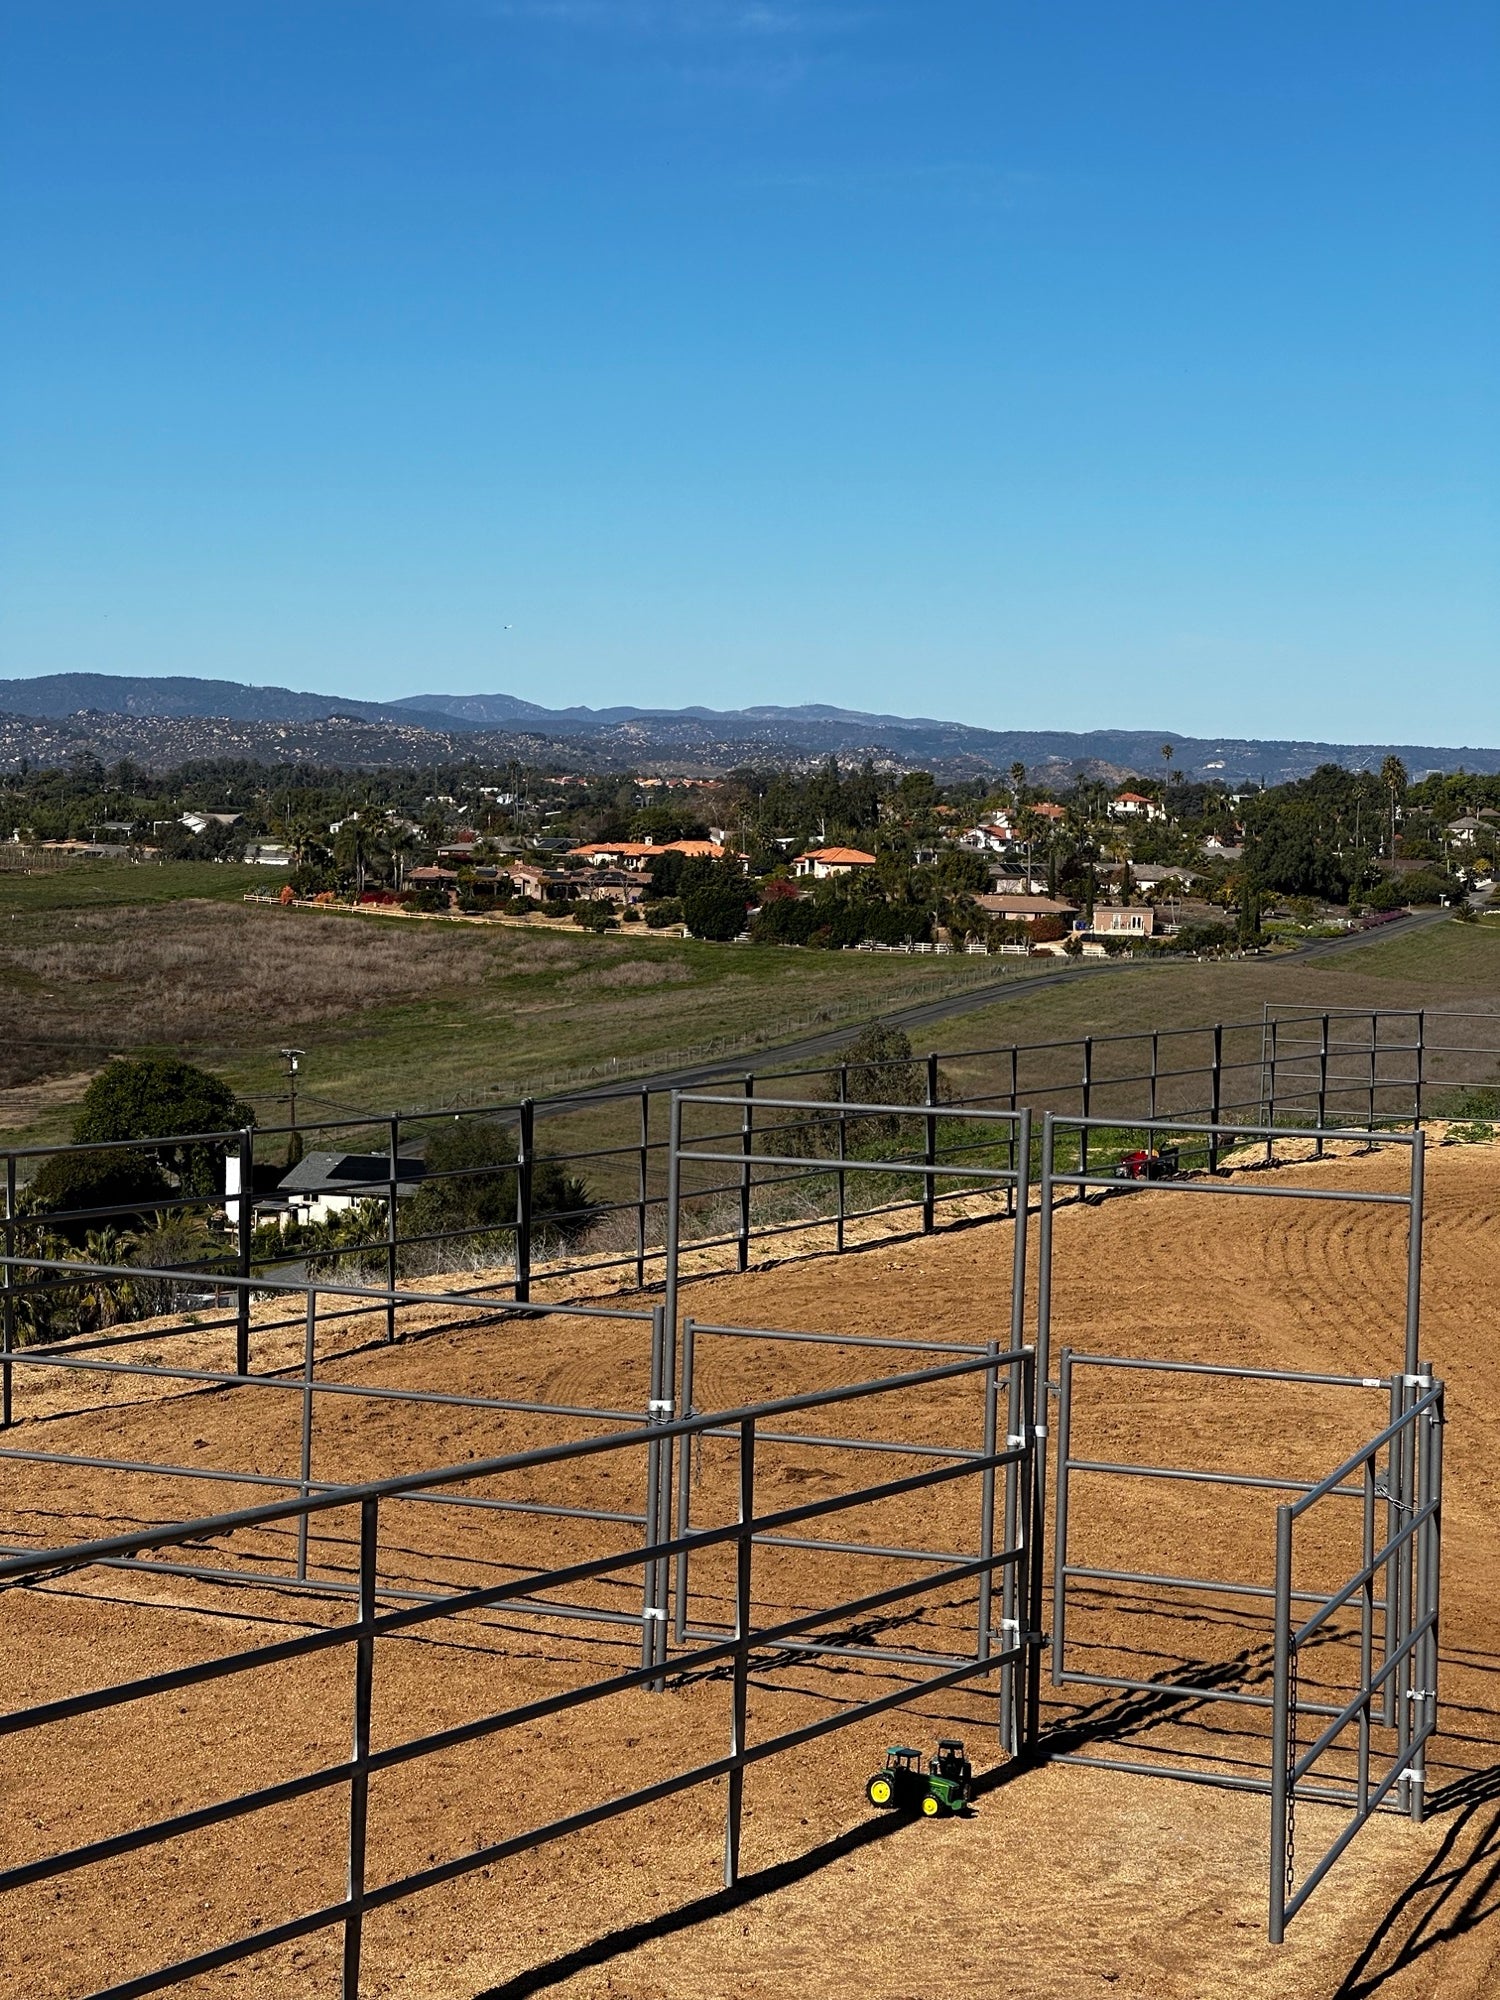 Check Out Our Customer's Beautiful Horse Corral in Fallbrook!